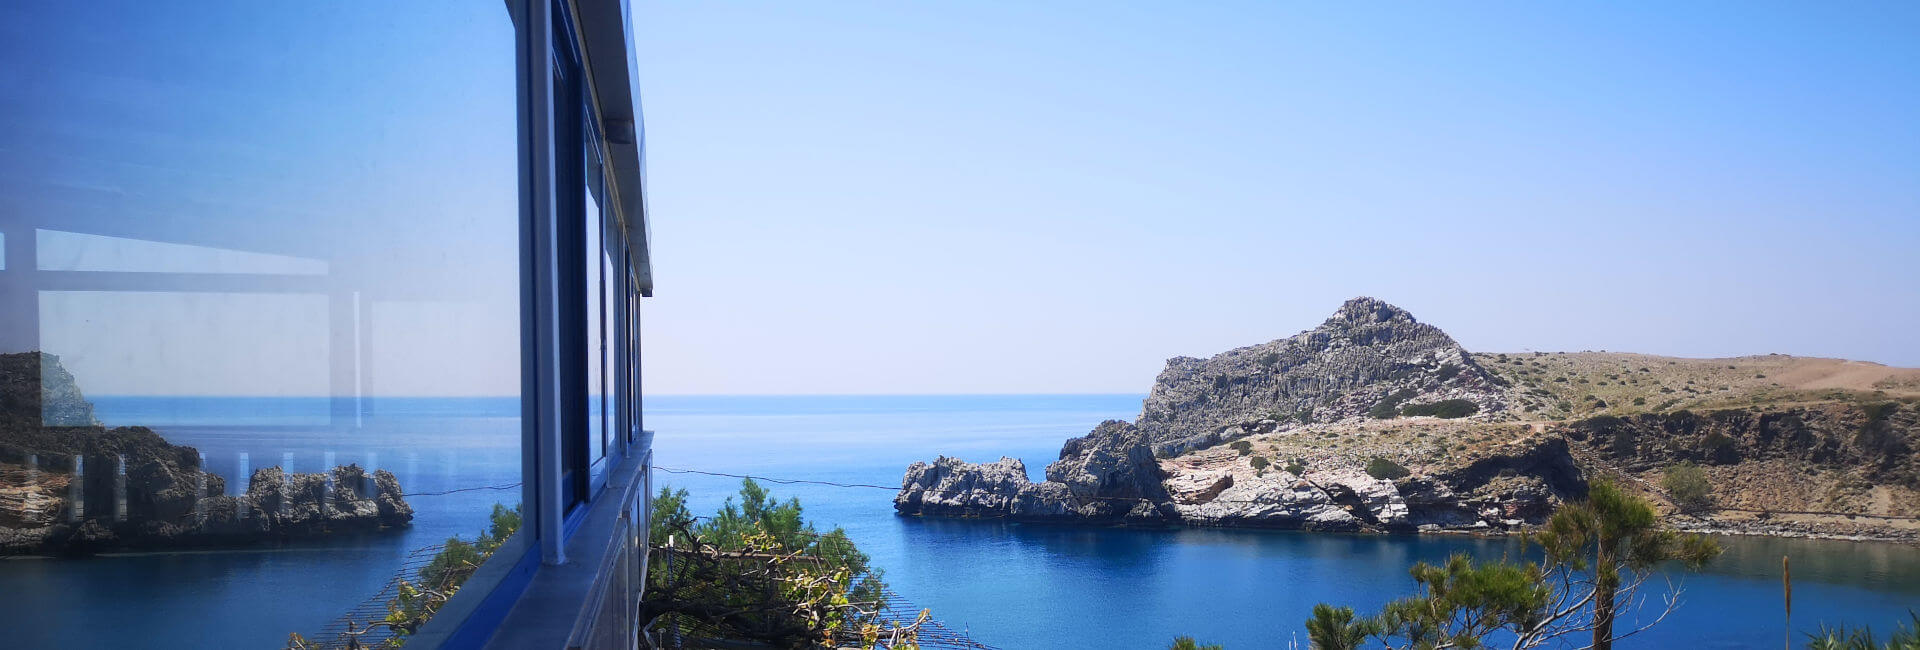 Looking out over Agios Pavlos bay from yoga shala